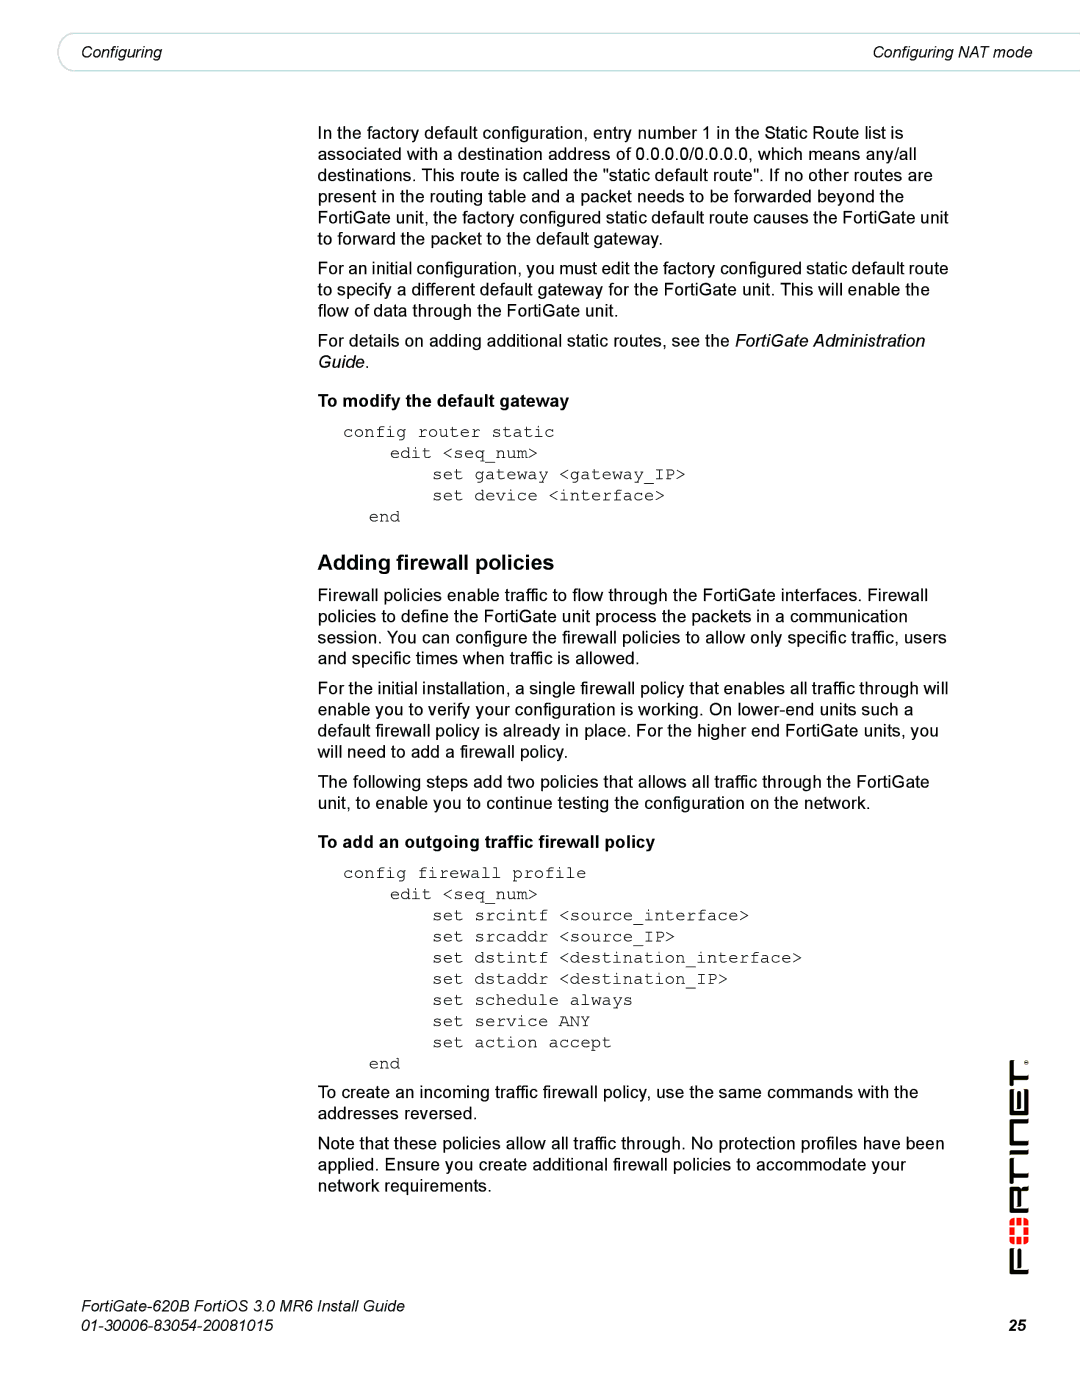 Fortinet 620B manual To modify the default gateway, To add an outgoing traffic firewall policy 